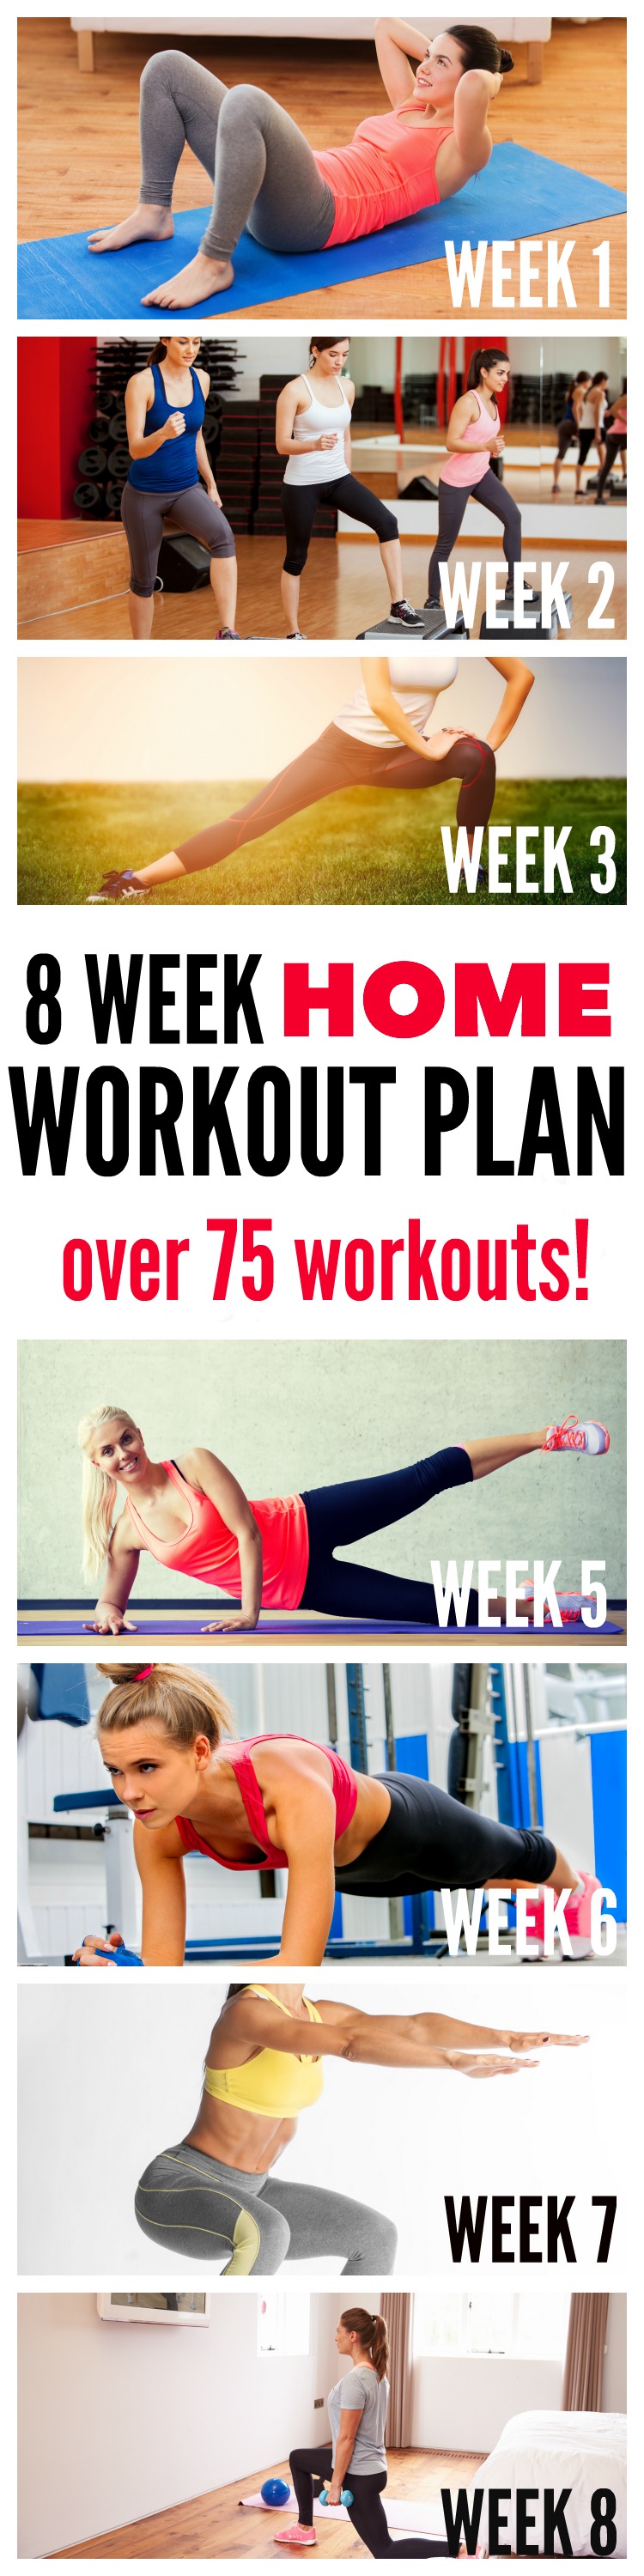 15 Minute 8 Week Workout Plan At Home Free for push your ABS